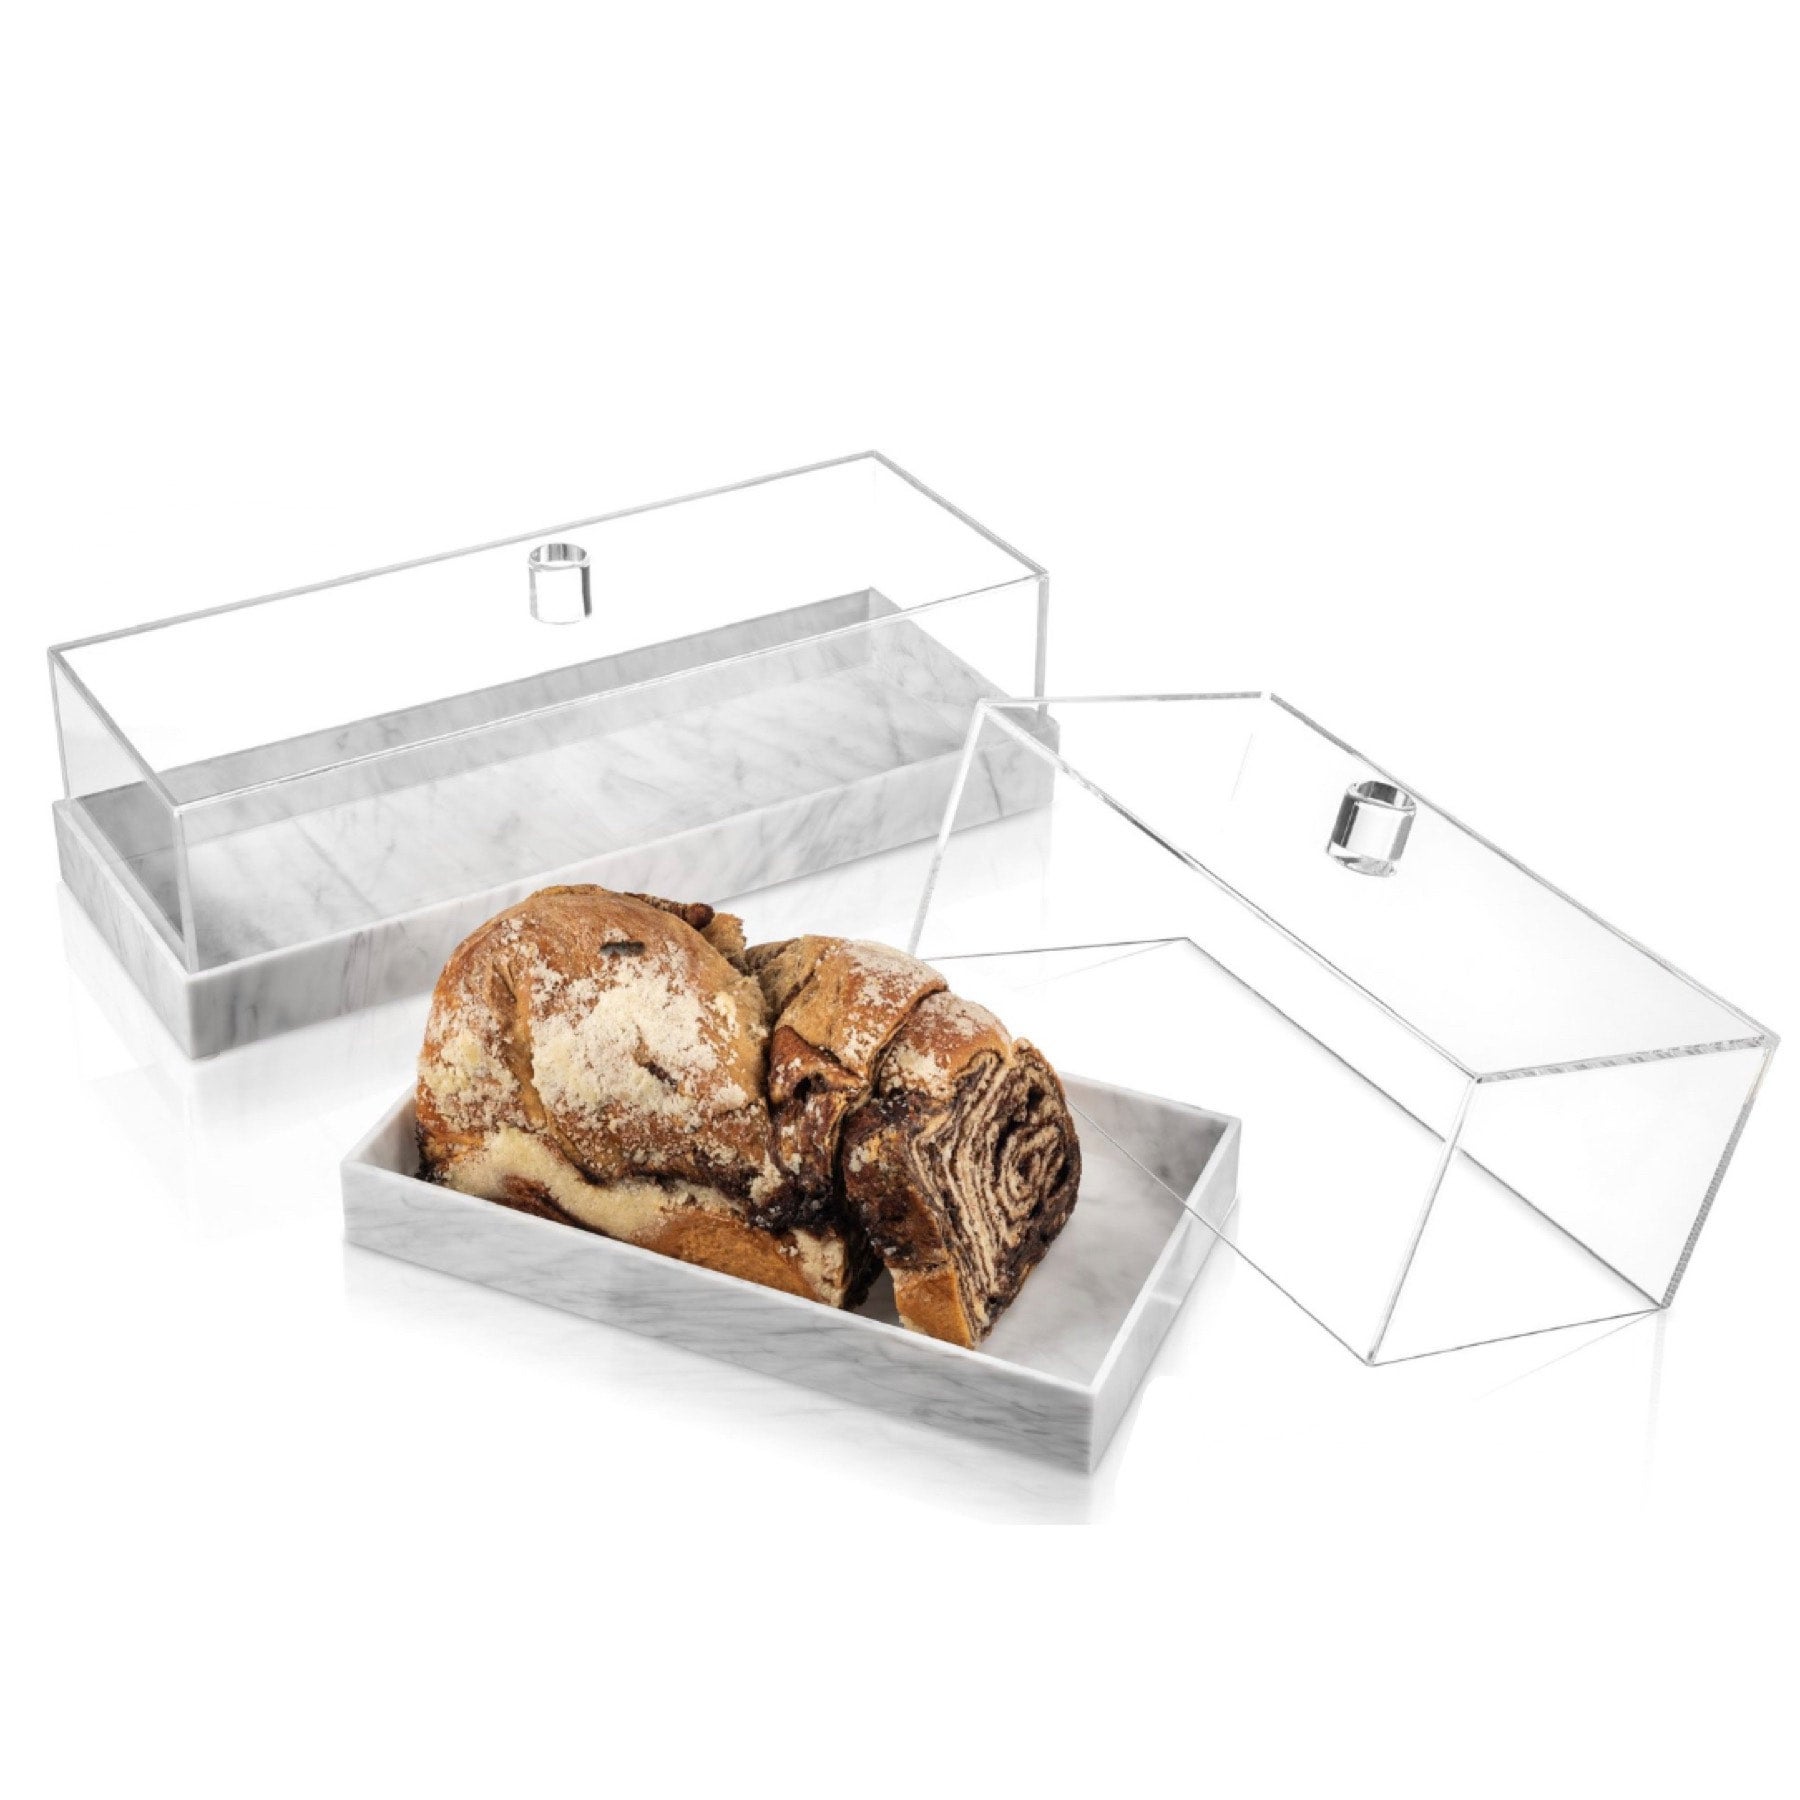 Lucite Clear Tray-Small